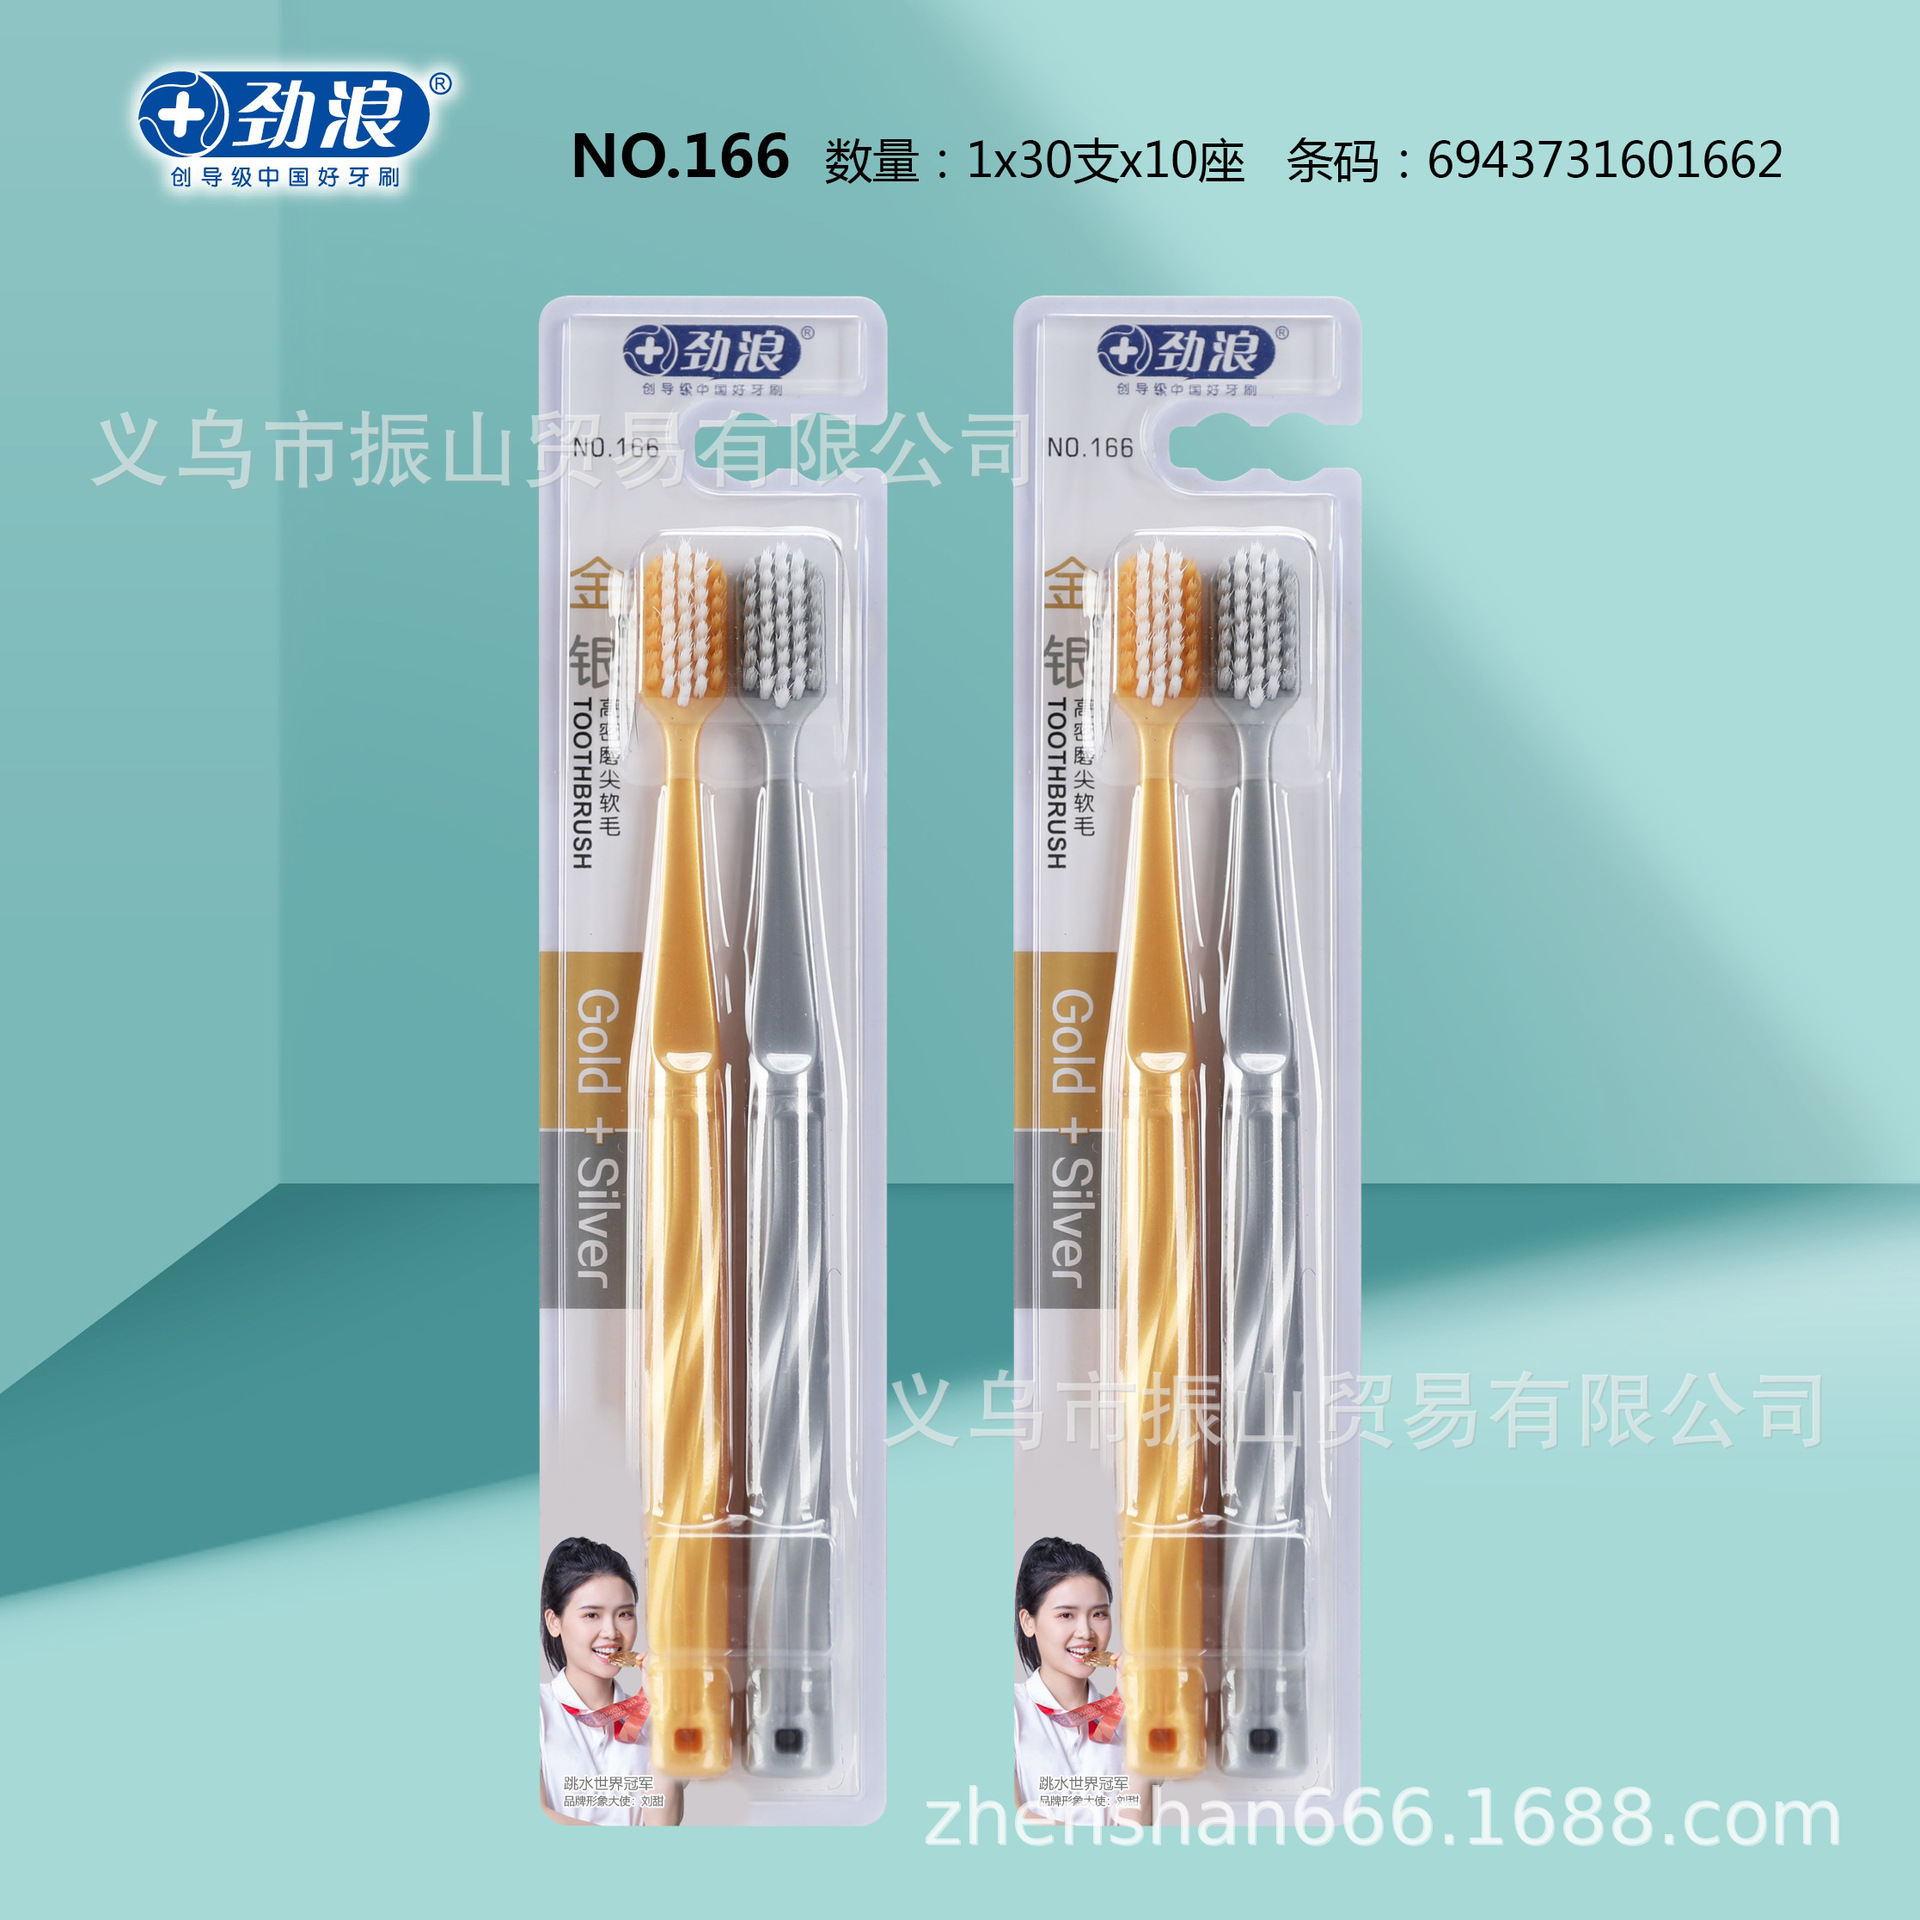 dynamic wave 166 streamlined design cool toothbrush handle gold and silver high density sharpening soft-bristle toothbrush